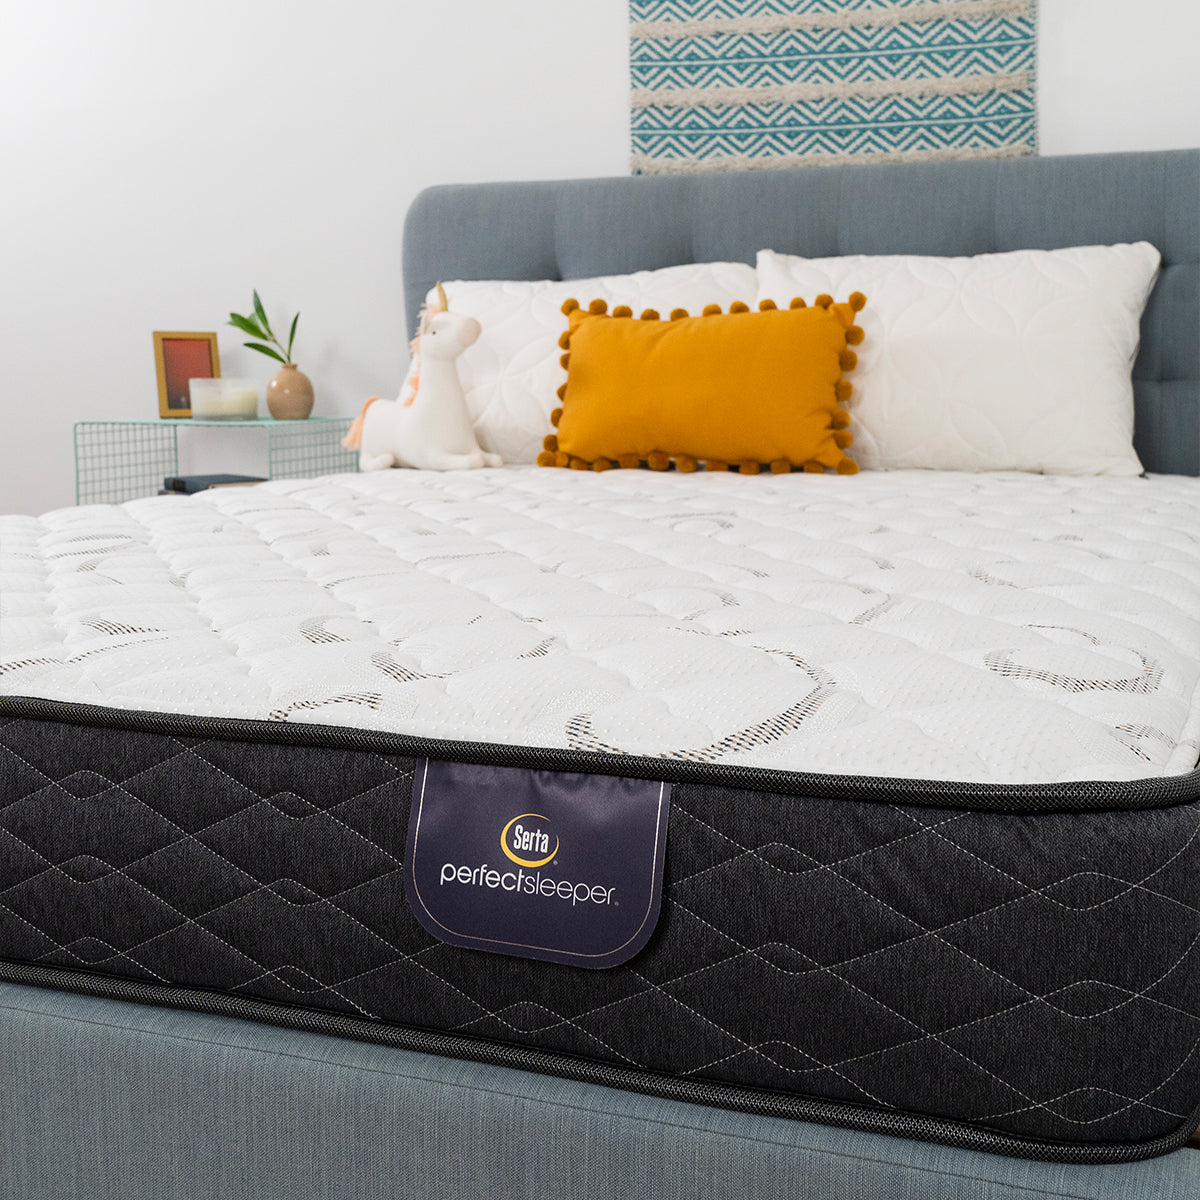 Serta Perfect Sleeper® Reedley Firm Mattress Corner Shot Showing Product Tag Label And Fabric Detail